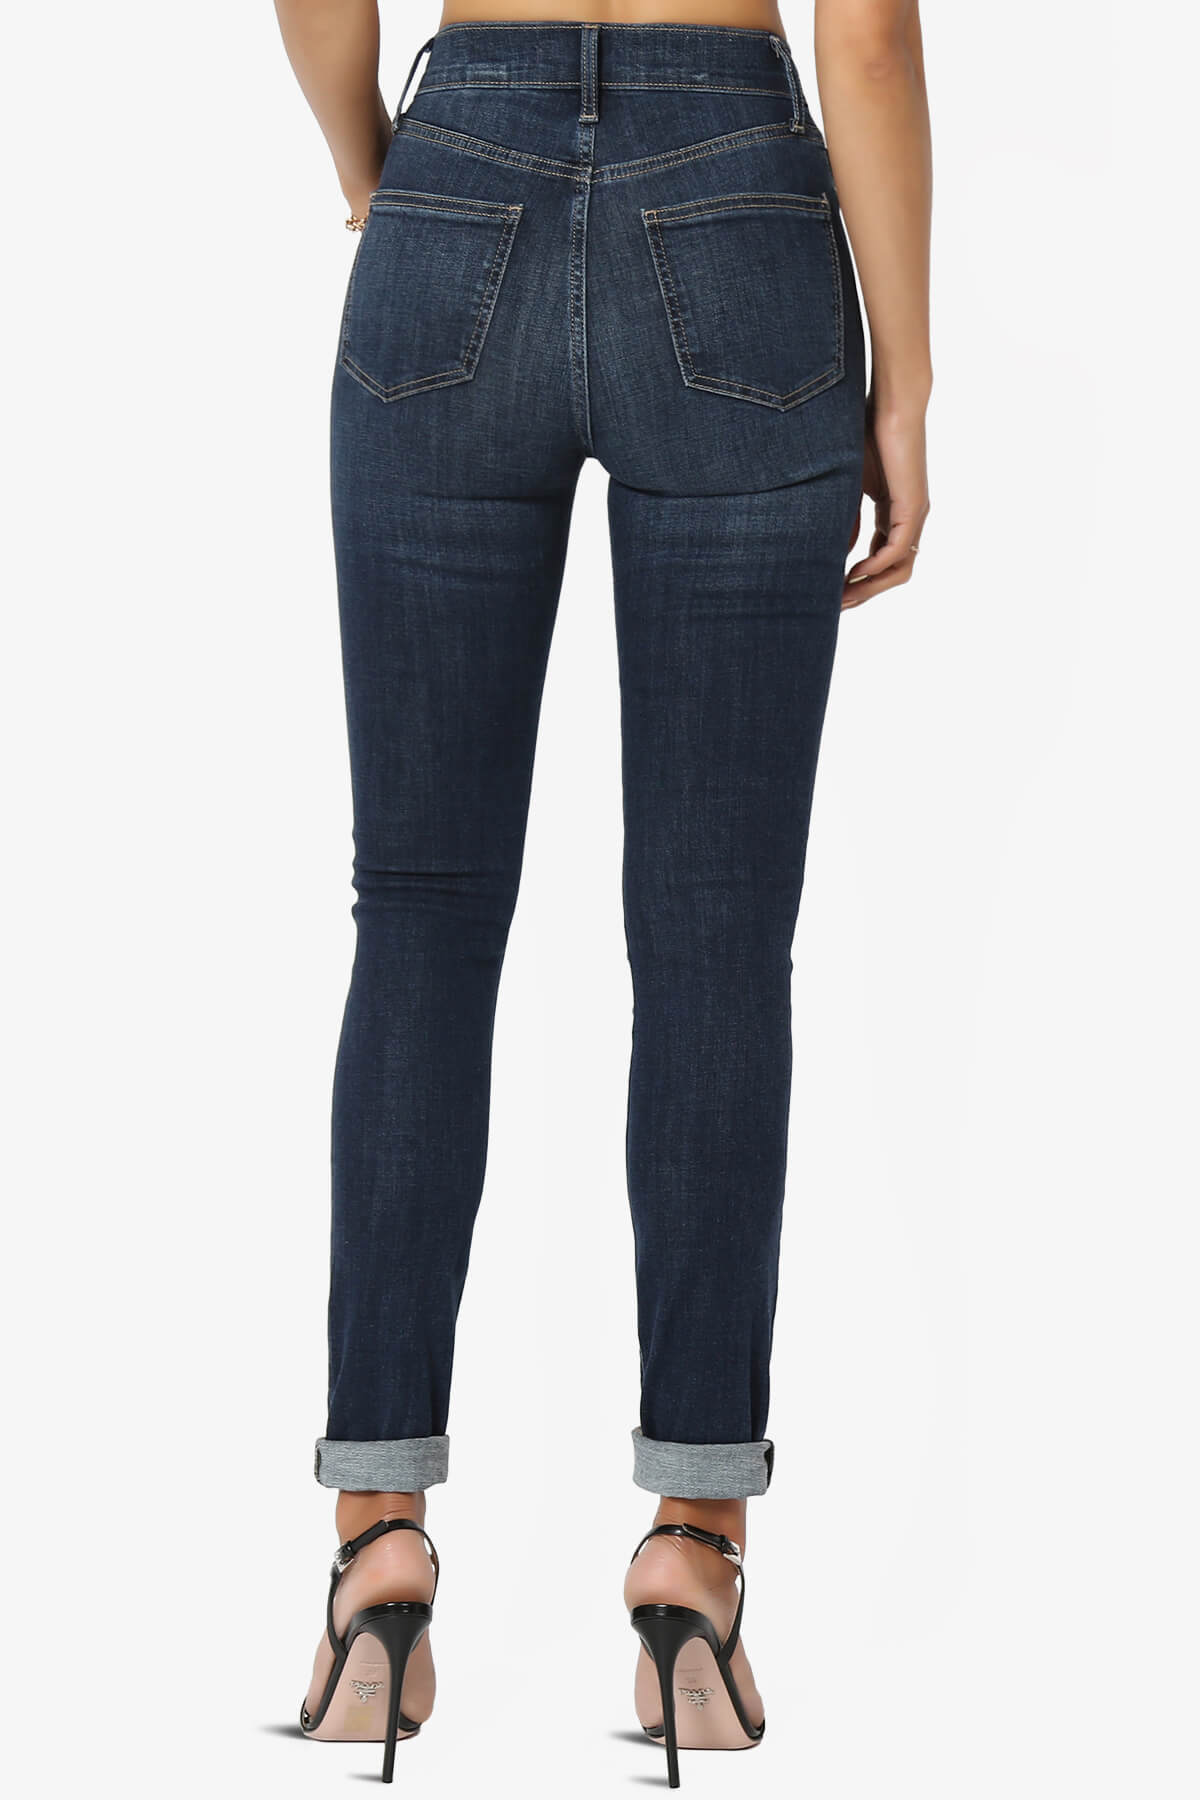 Load image into Gallery viewer, Jude High Rise Ankle Skinny Jeans in Bseat DARK_2
